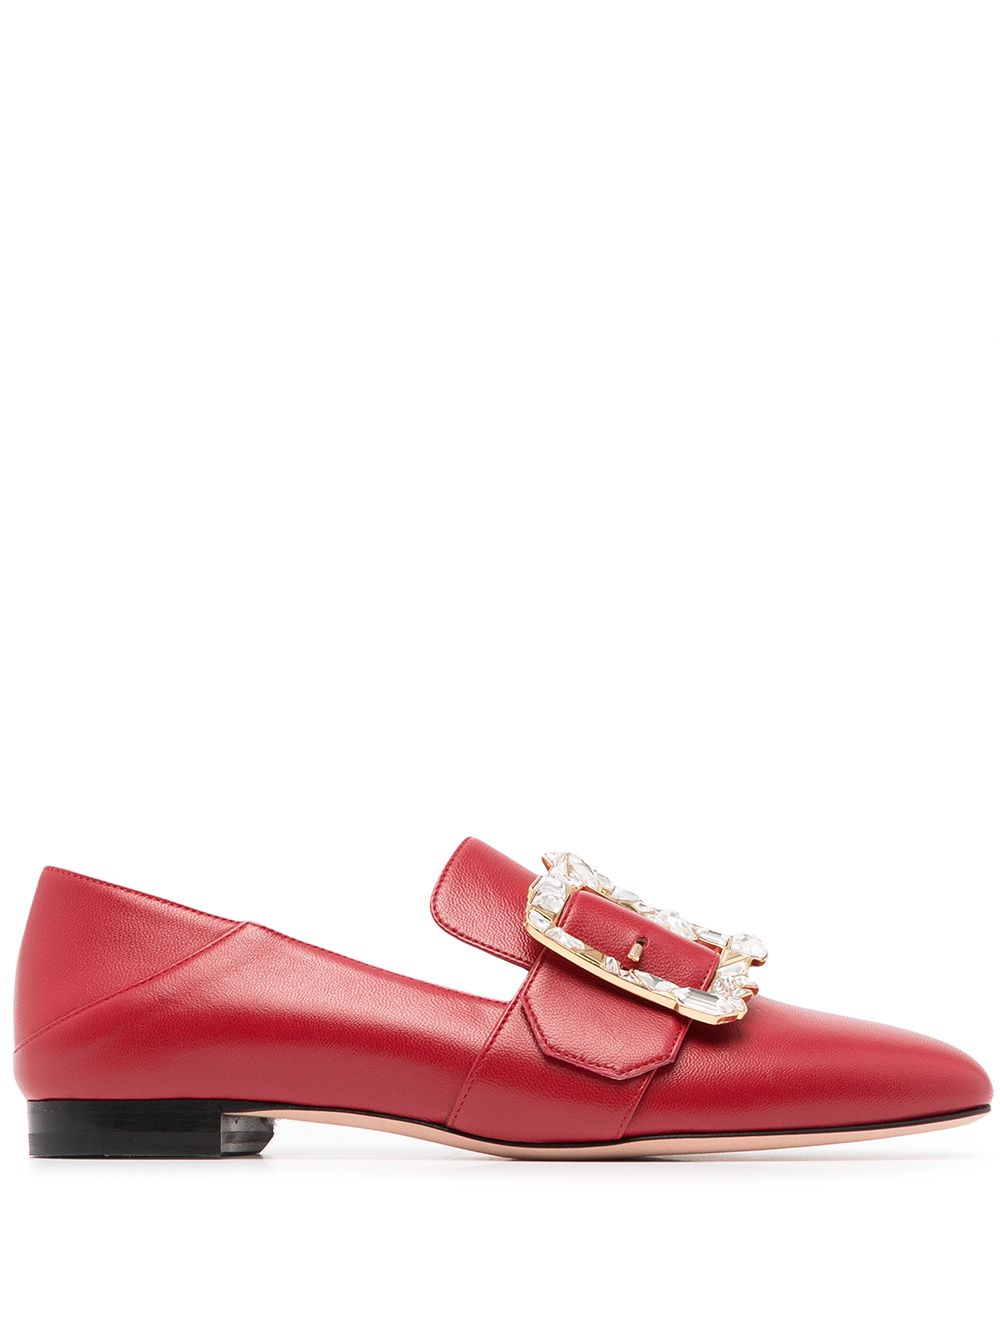 Bally Janelle leather slippers - Red von Bally